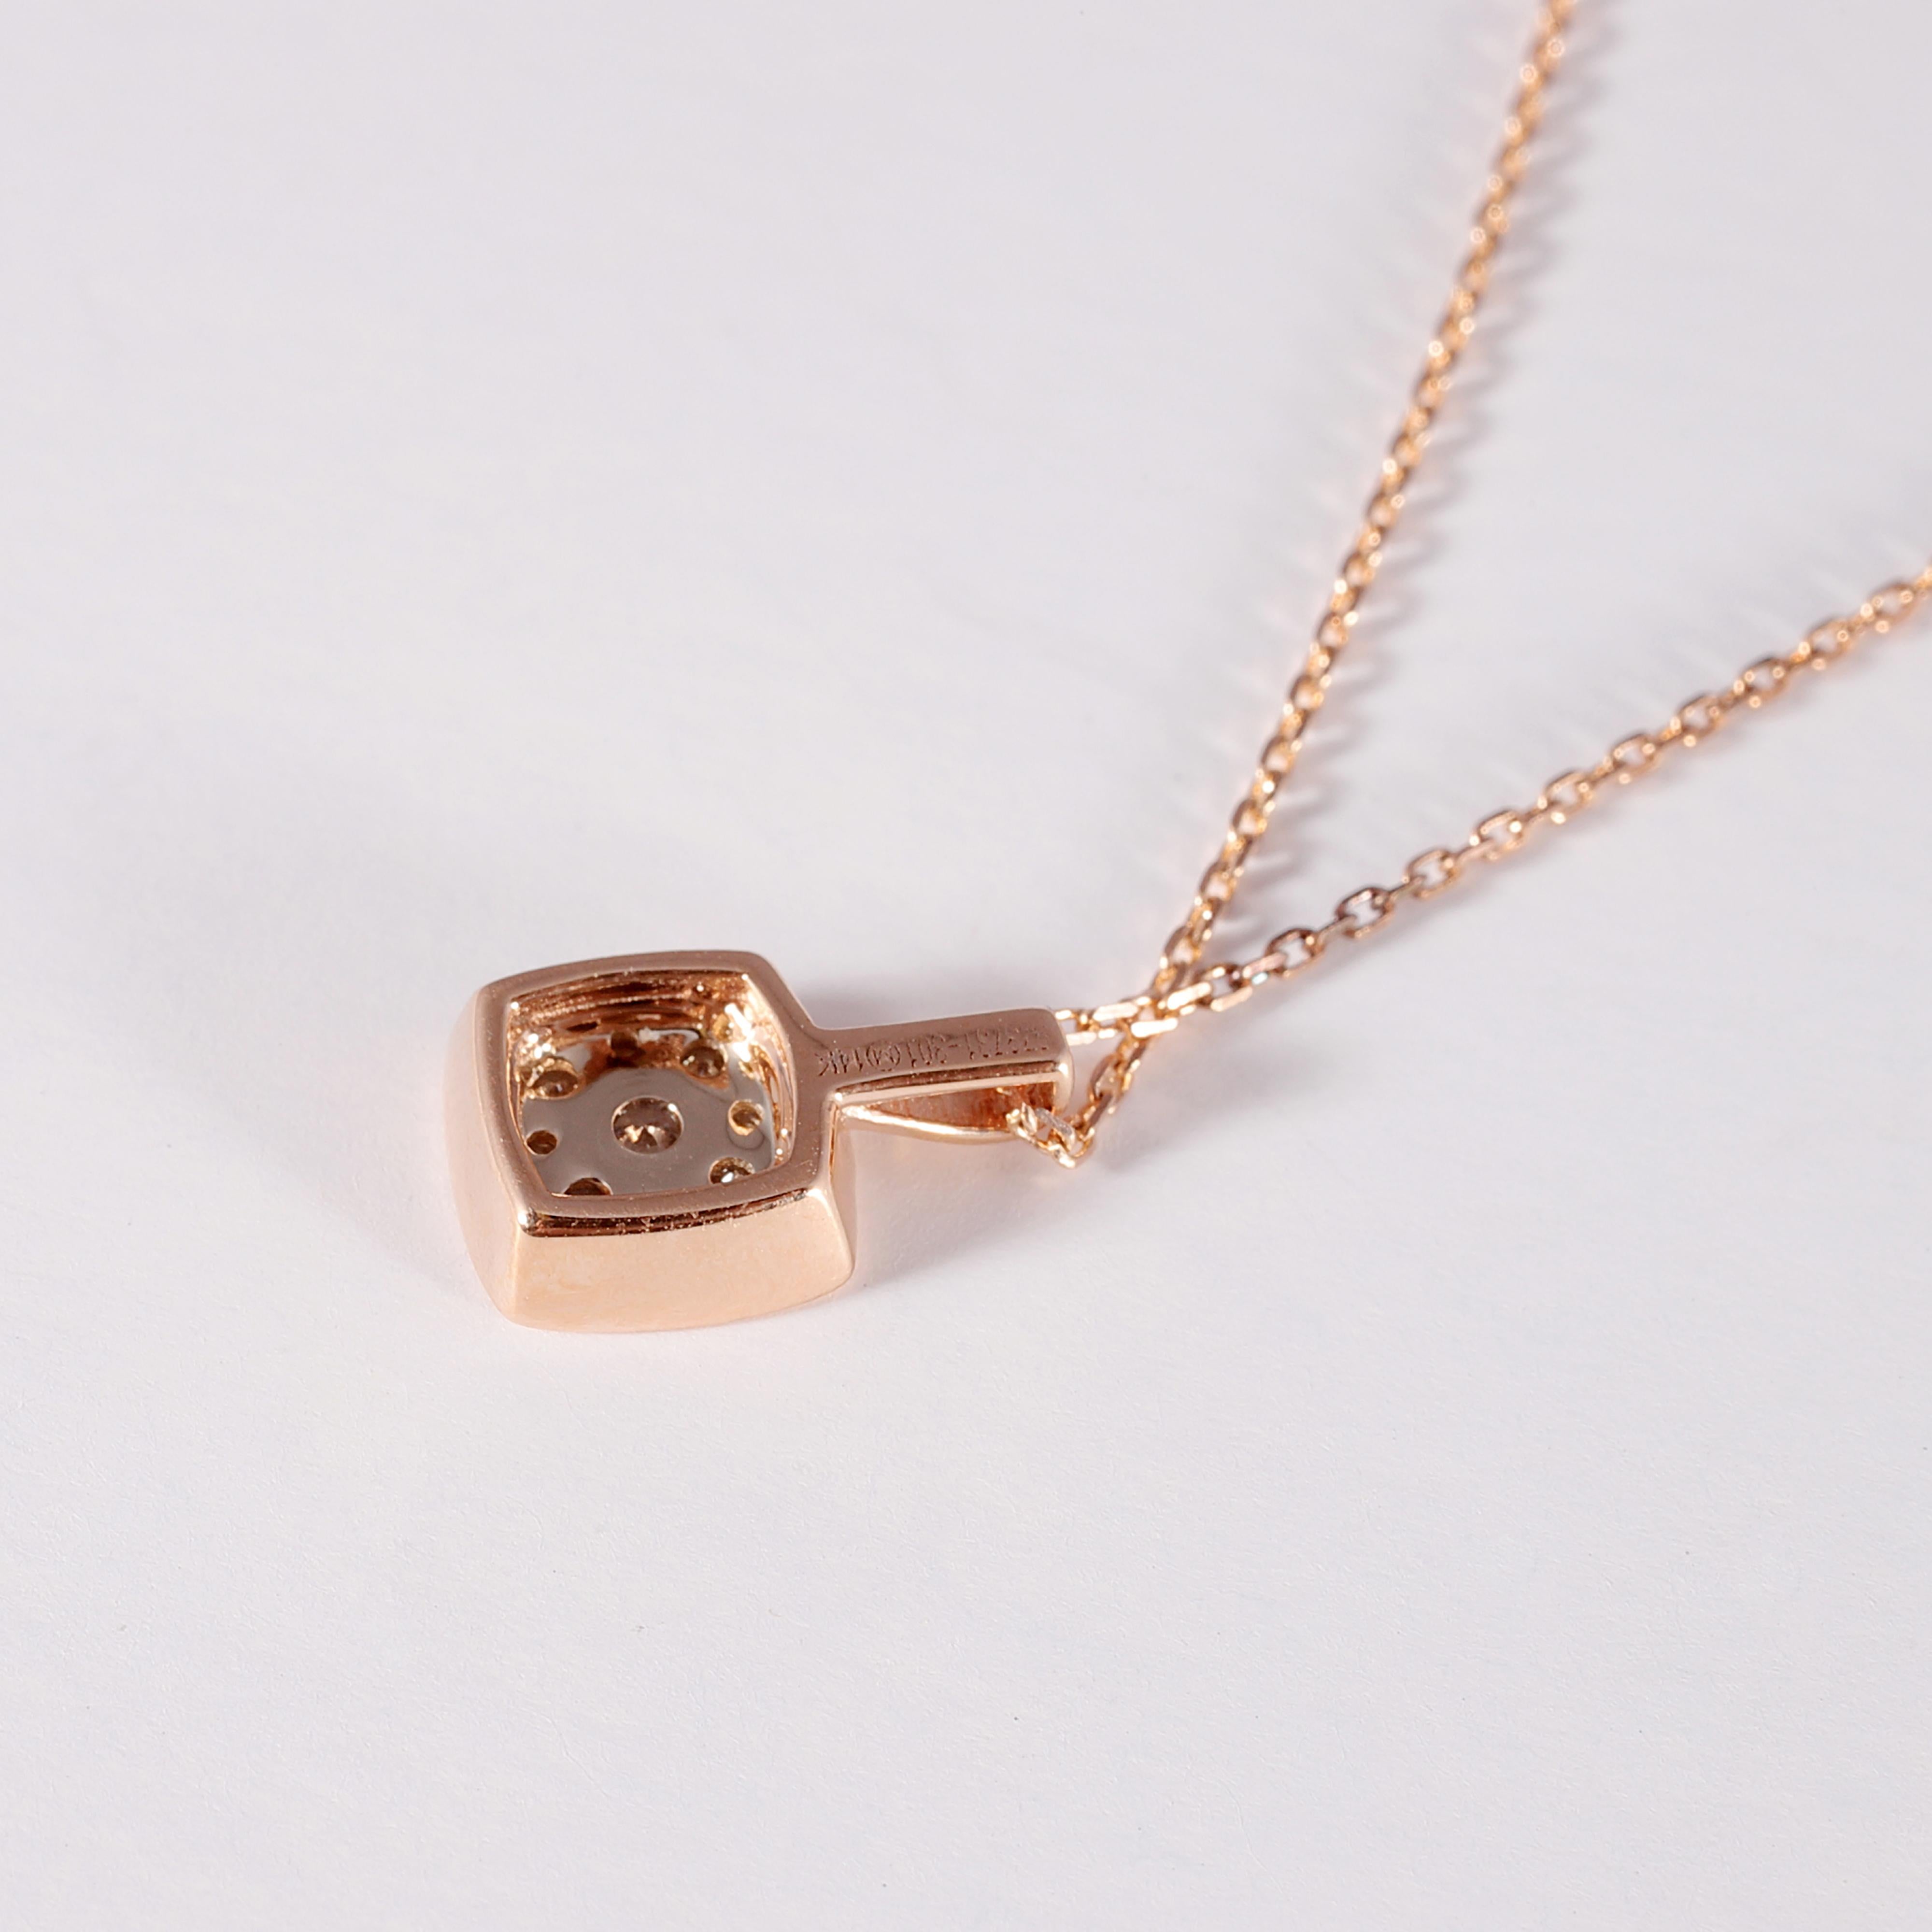 The warmth of the rose gold contrasts perfectly with the 0.19 carats of white diamonds!  Wear this beauty alone or layer it with other necklaces for two different looks!